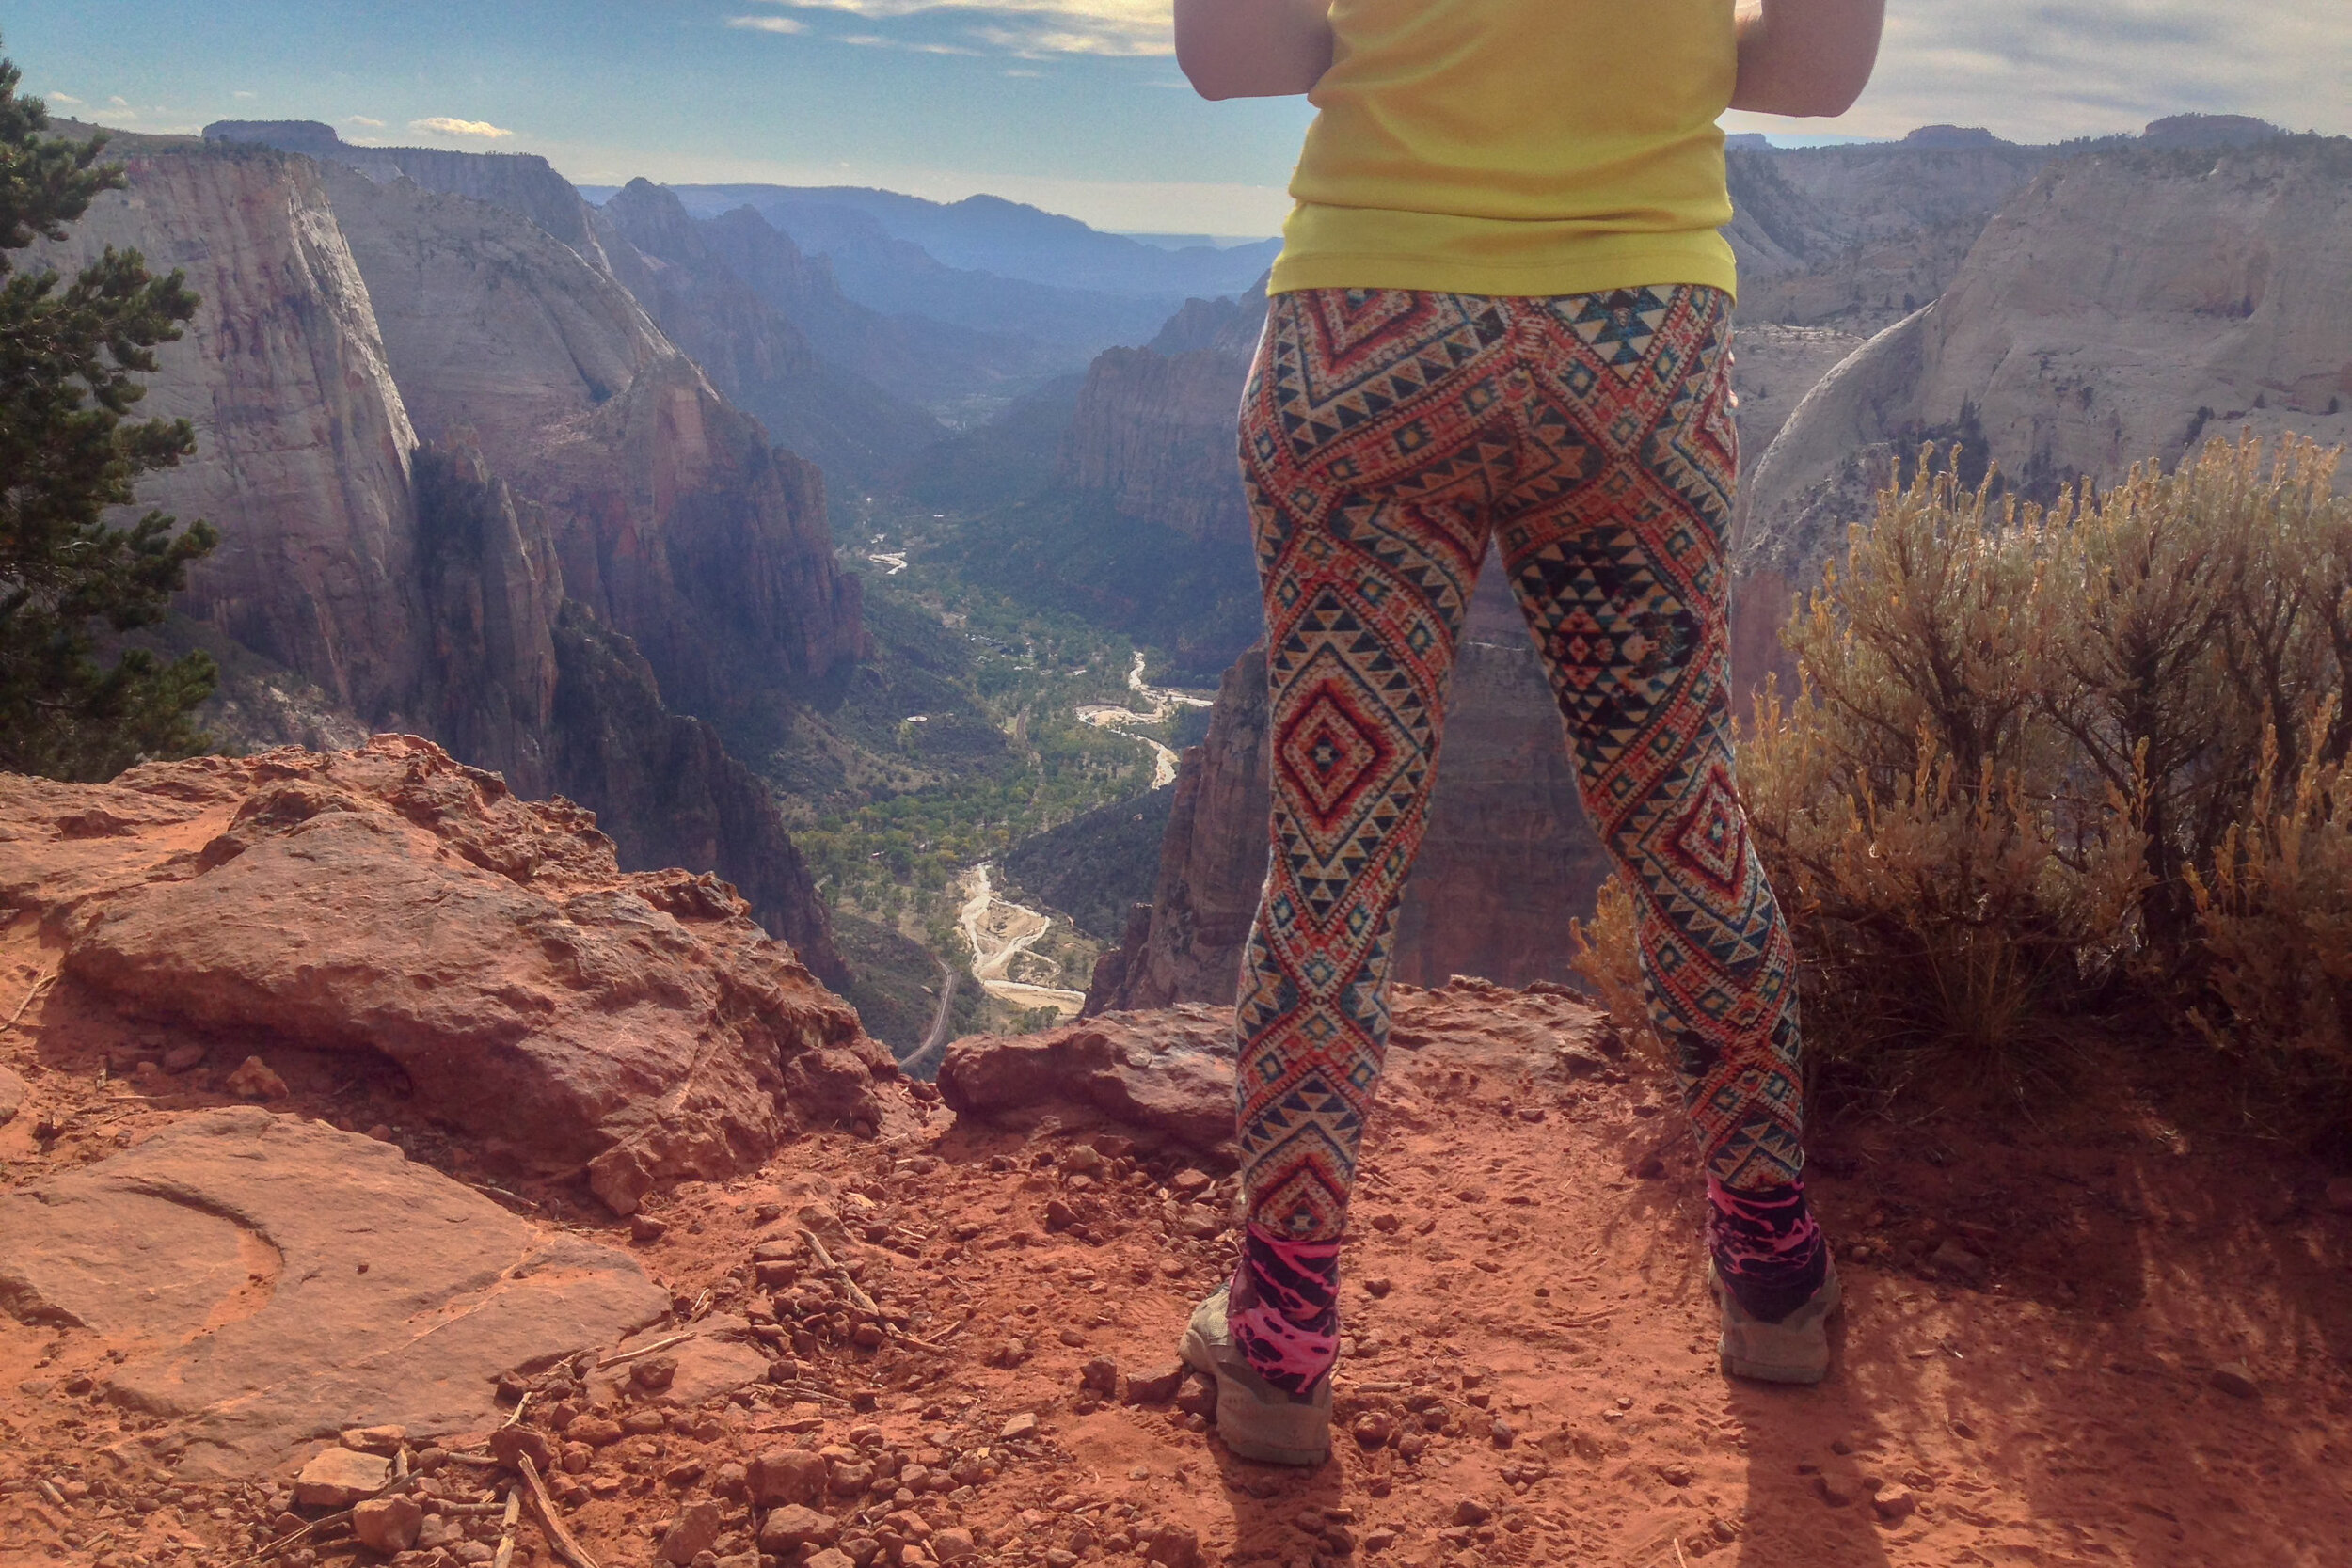 synthetic leggings are a popular alternative to hiking shorts or nylon pants for women